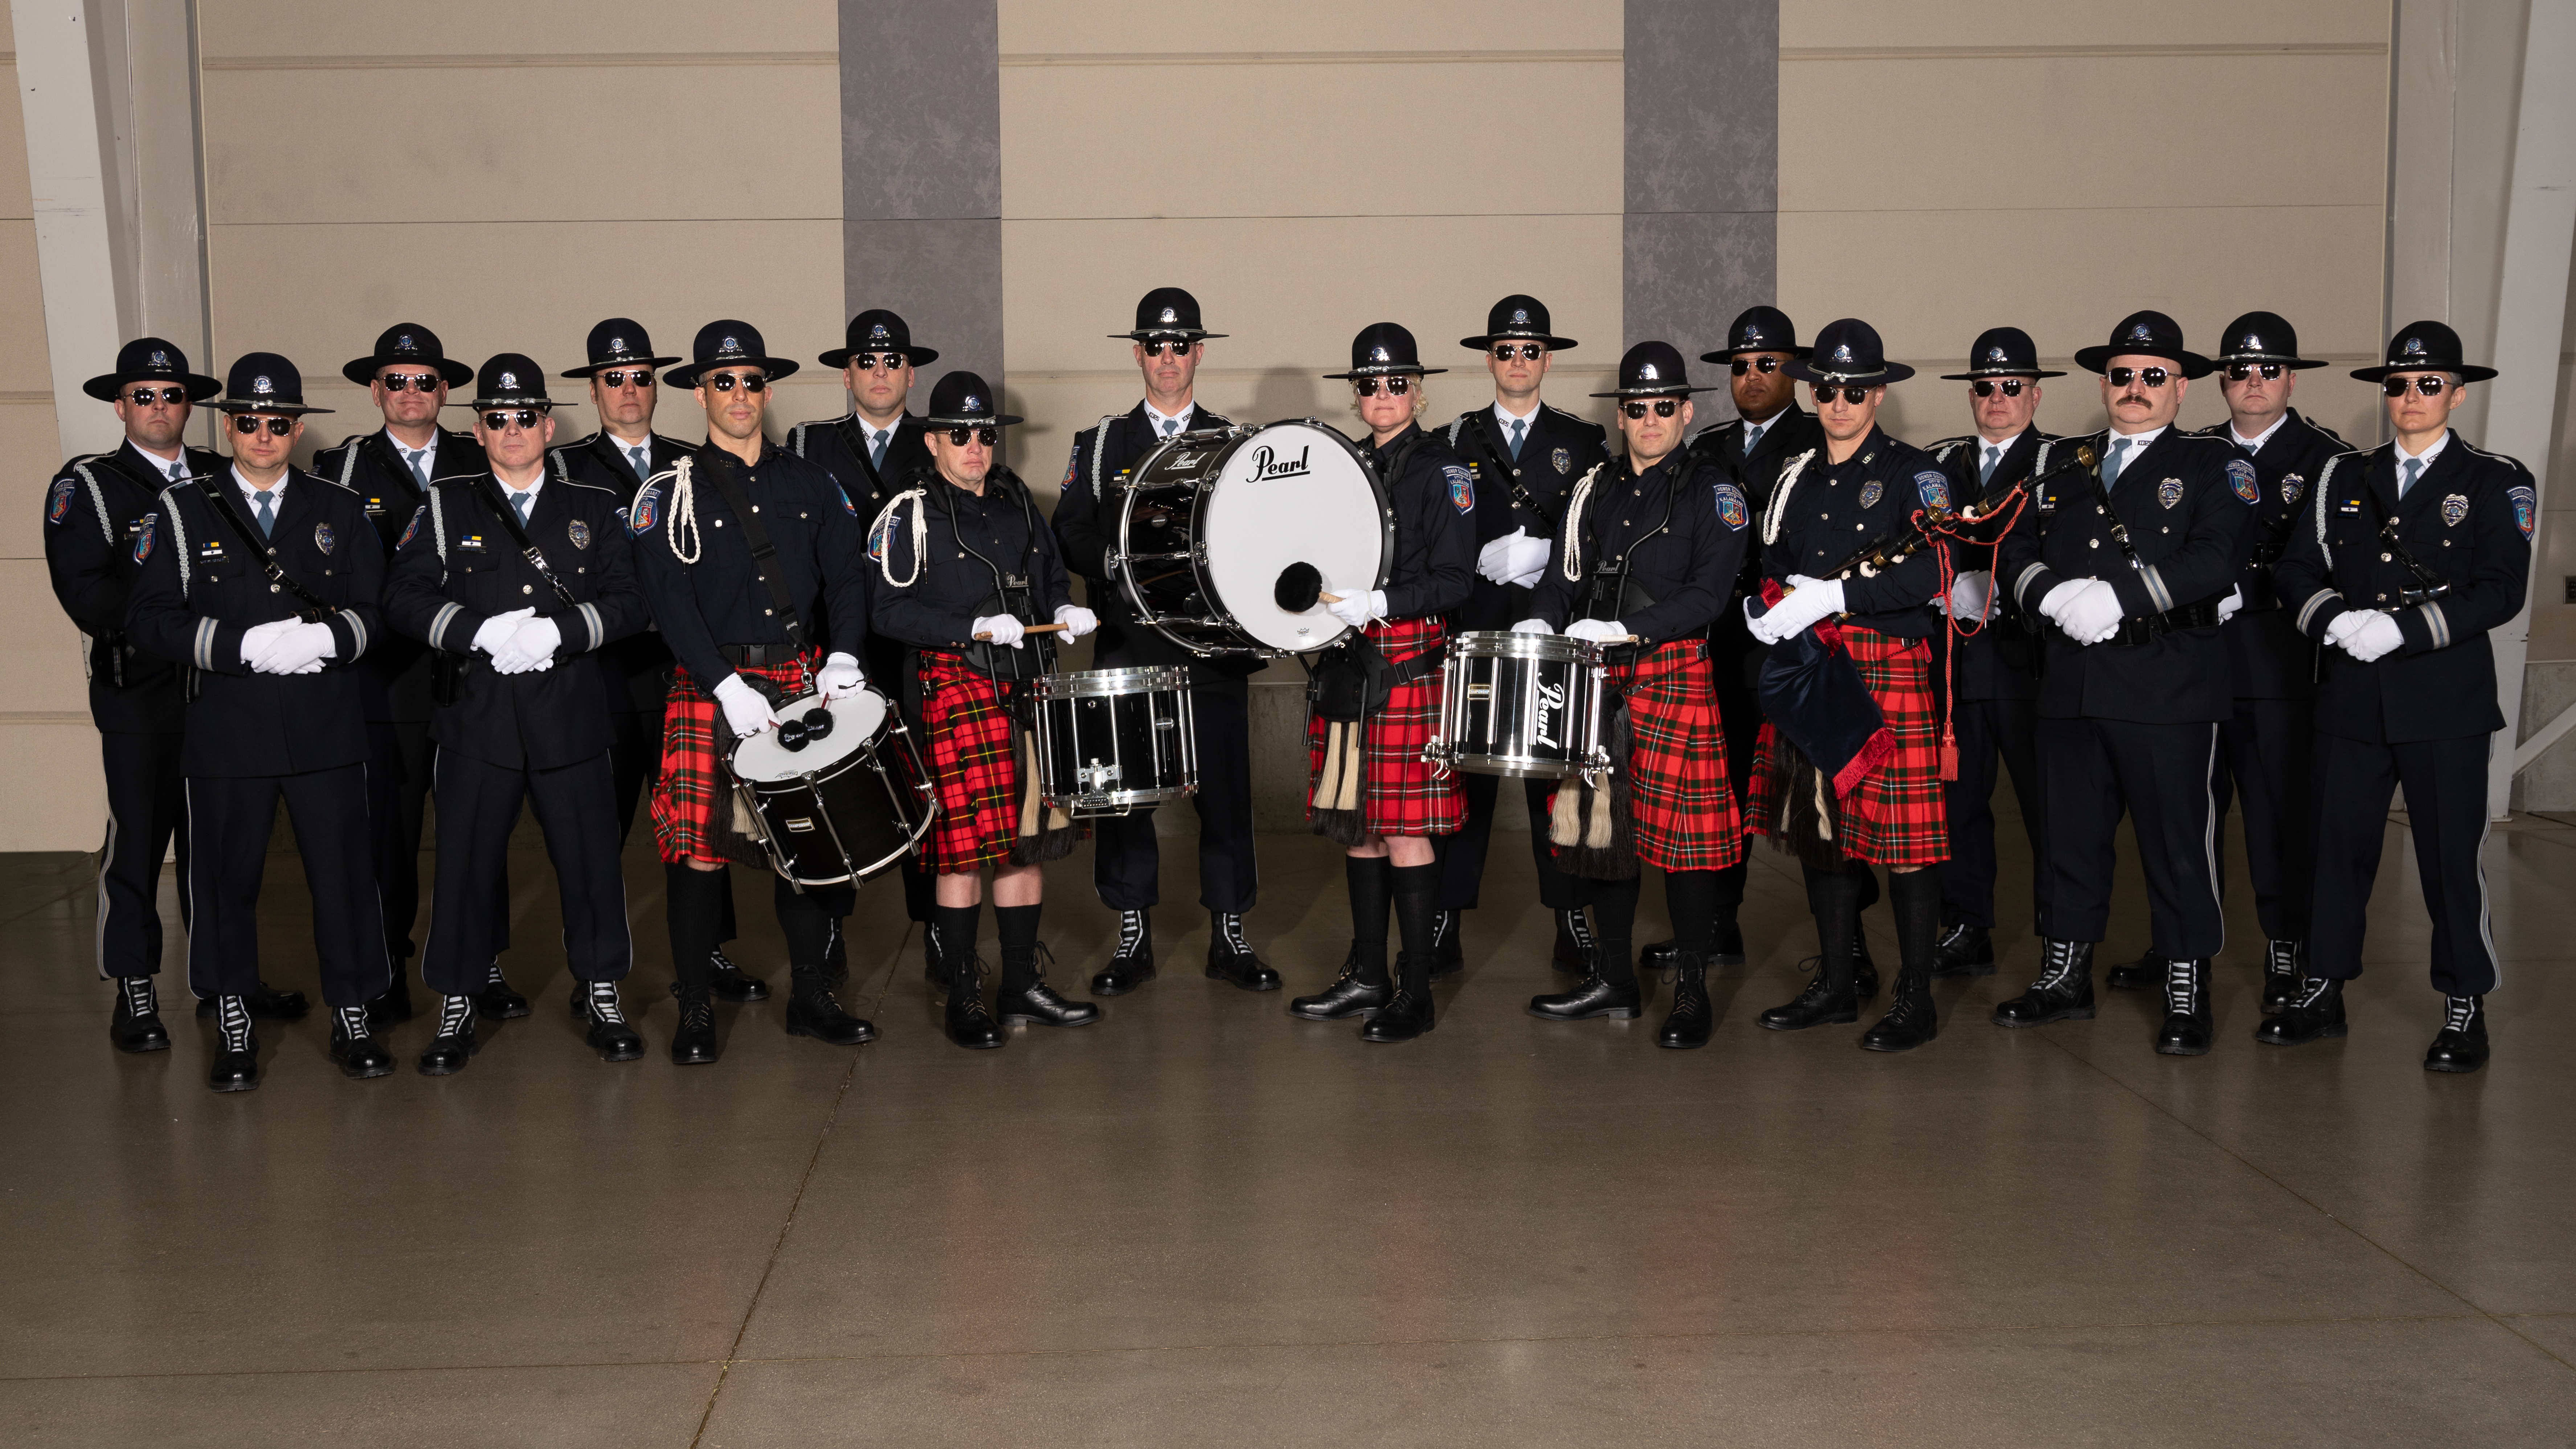 A group photo of the KDPS Pipe and Drum Team